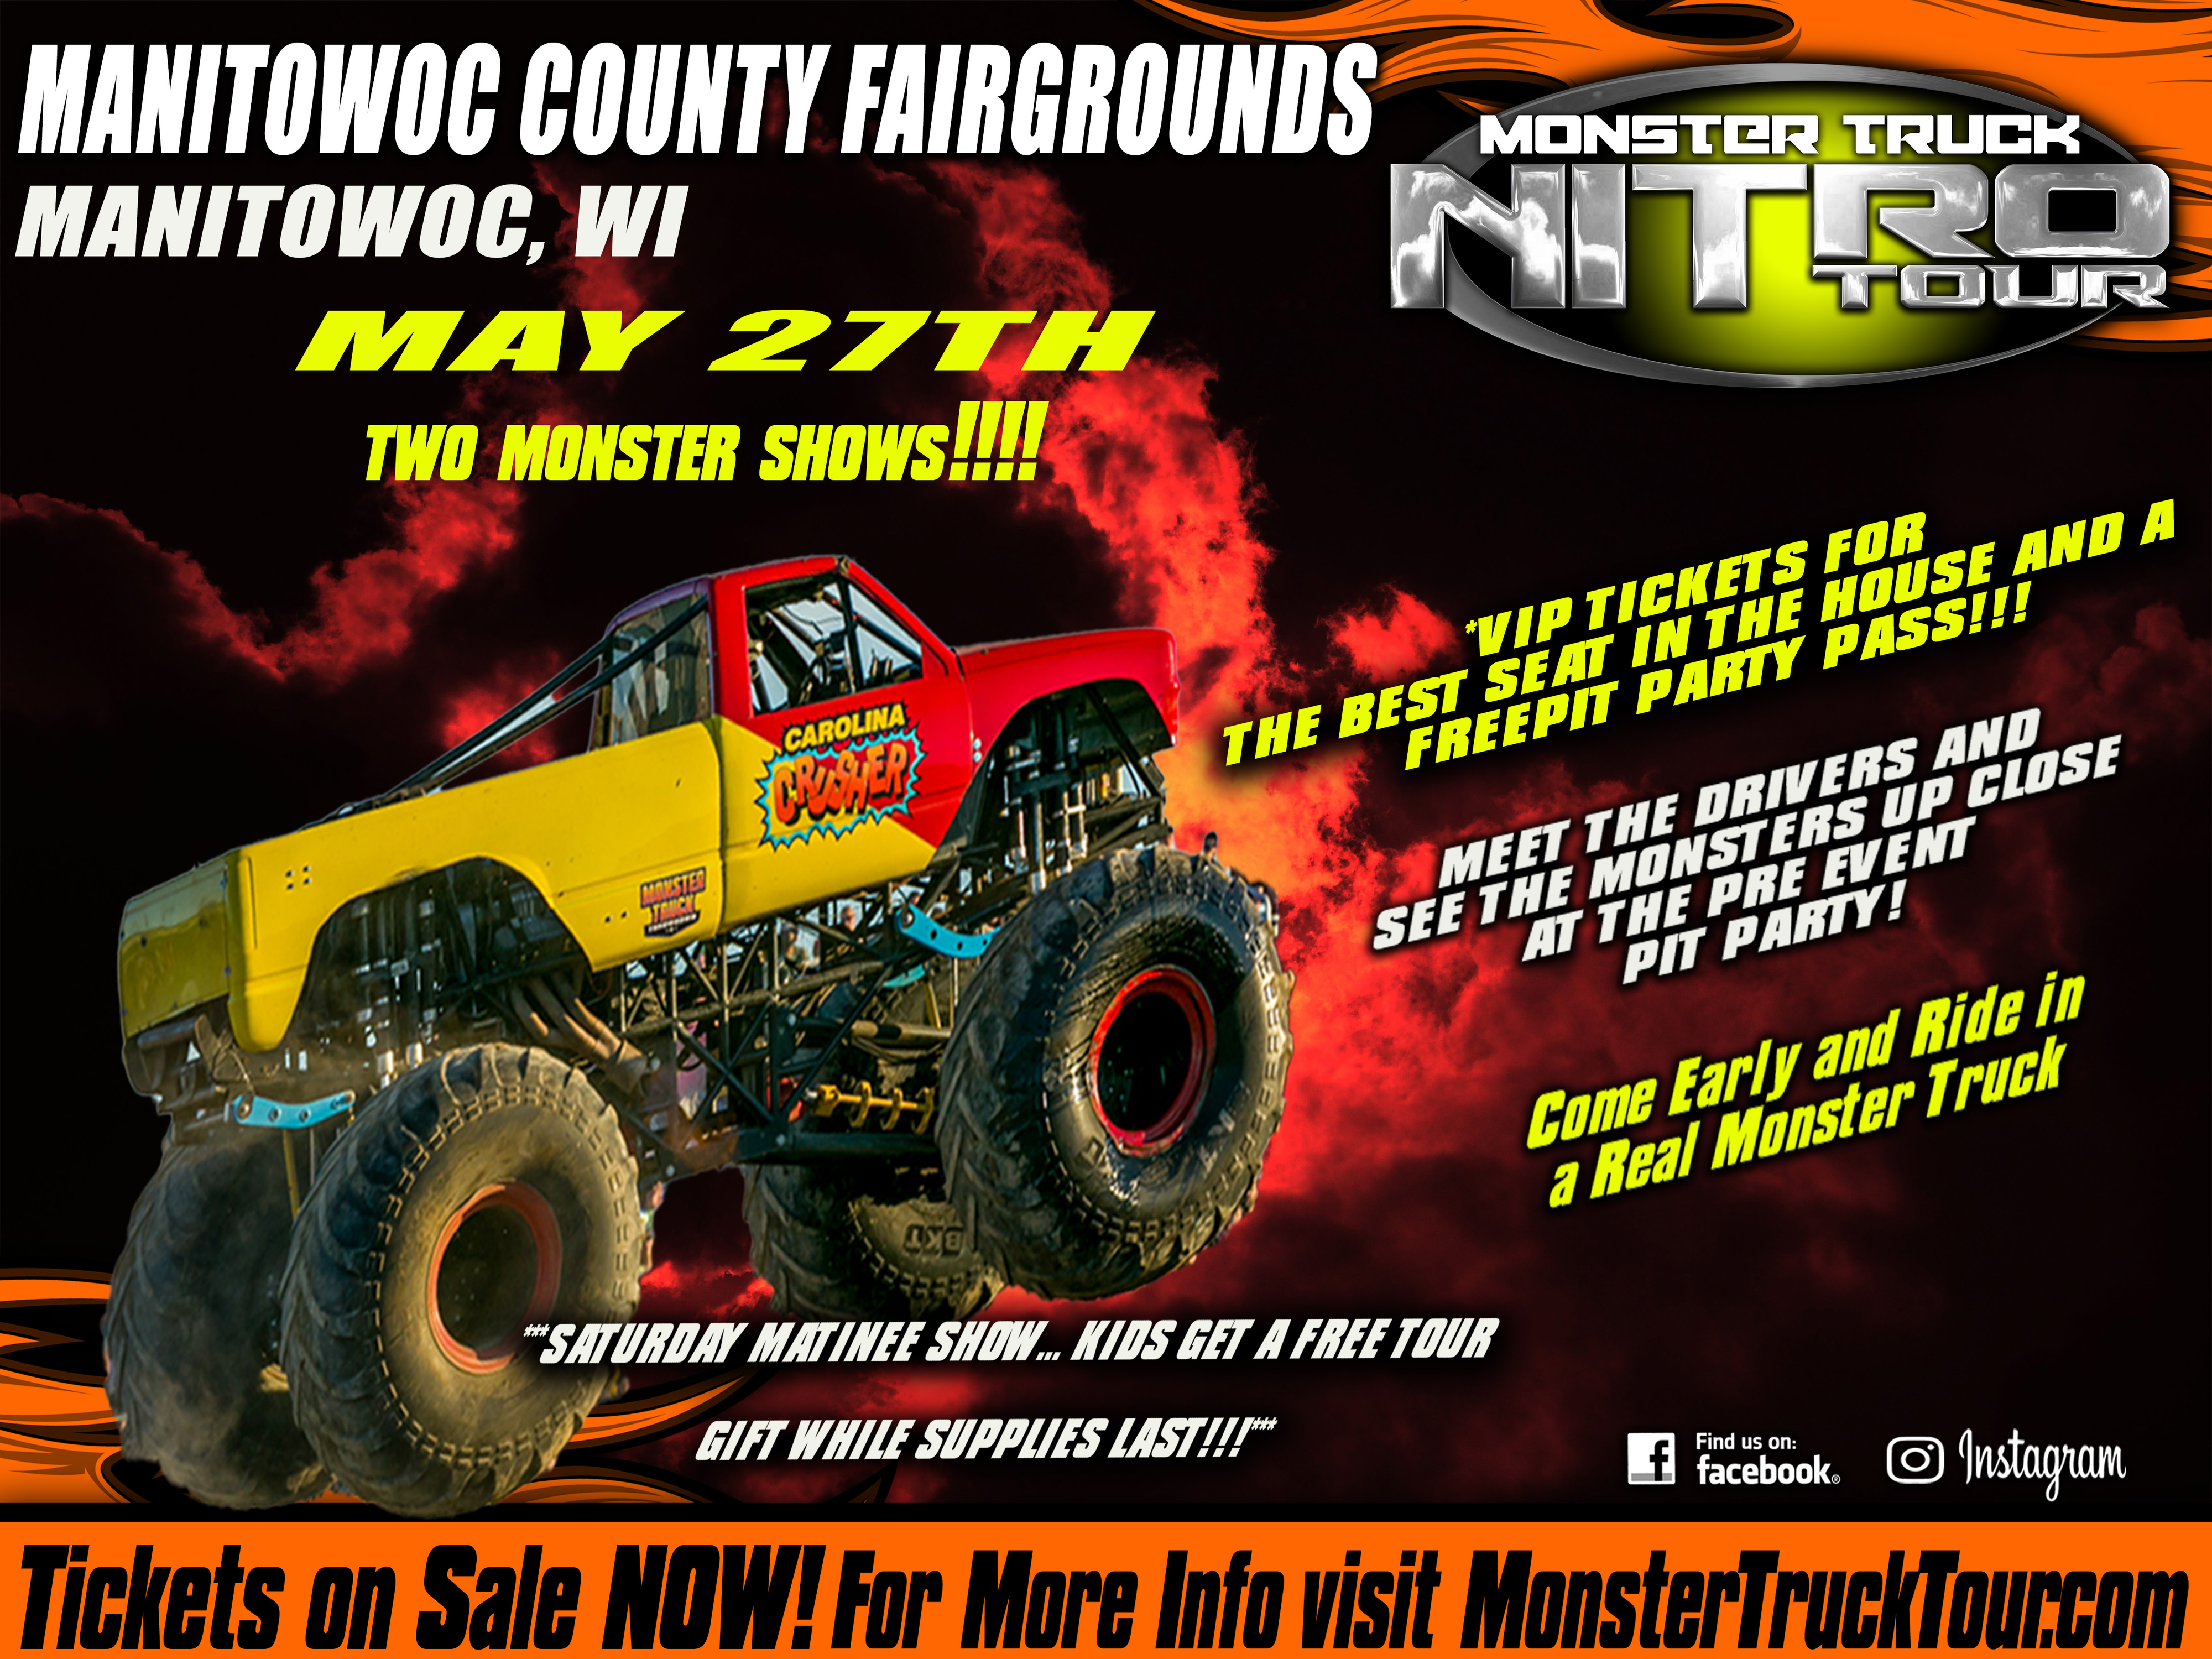 Otto talks with Mike from the Monster Truck Nitro Tour